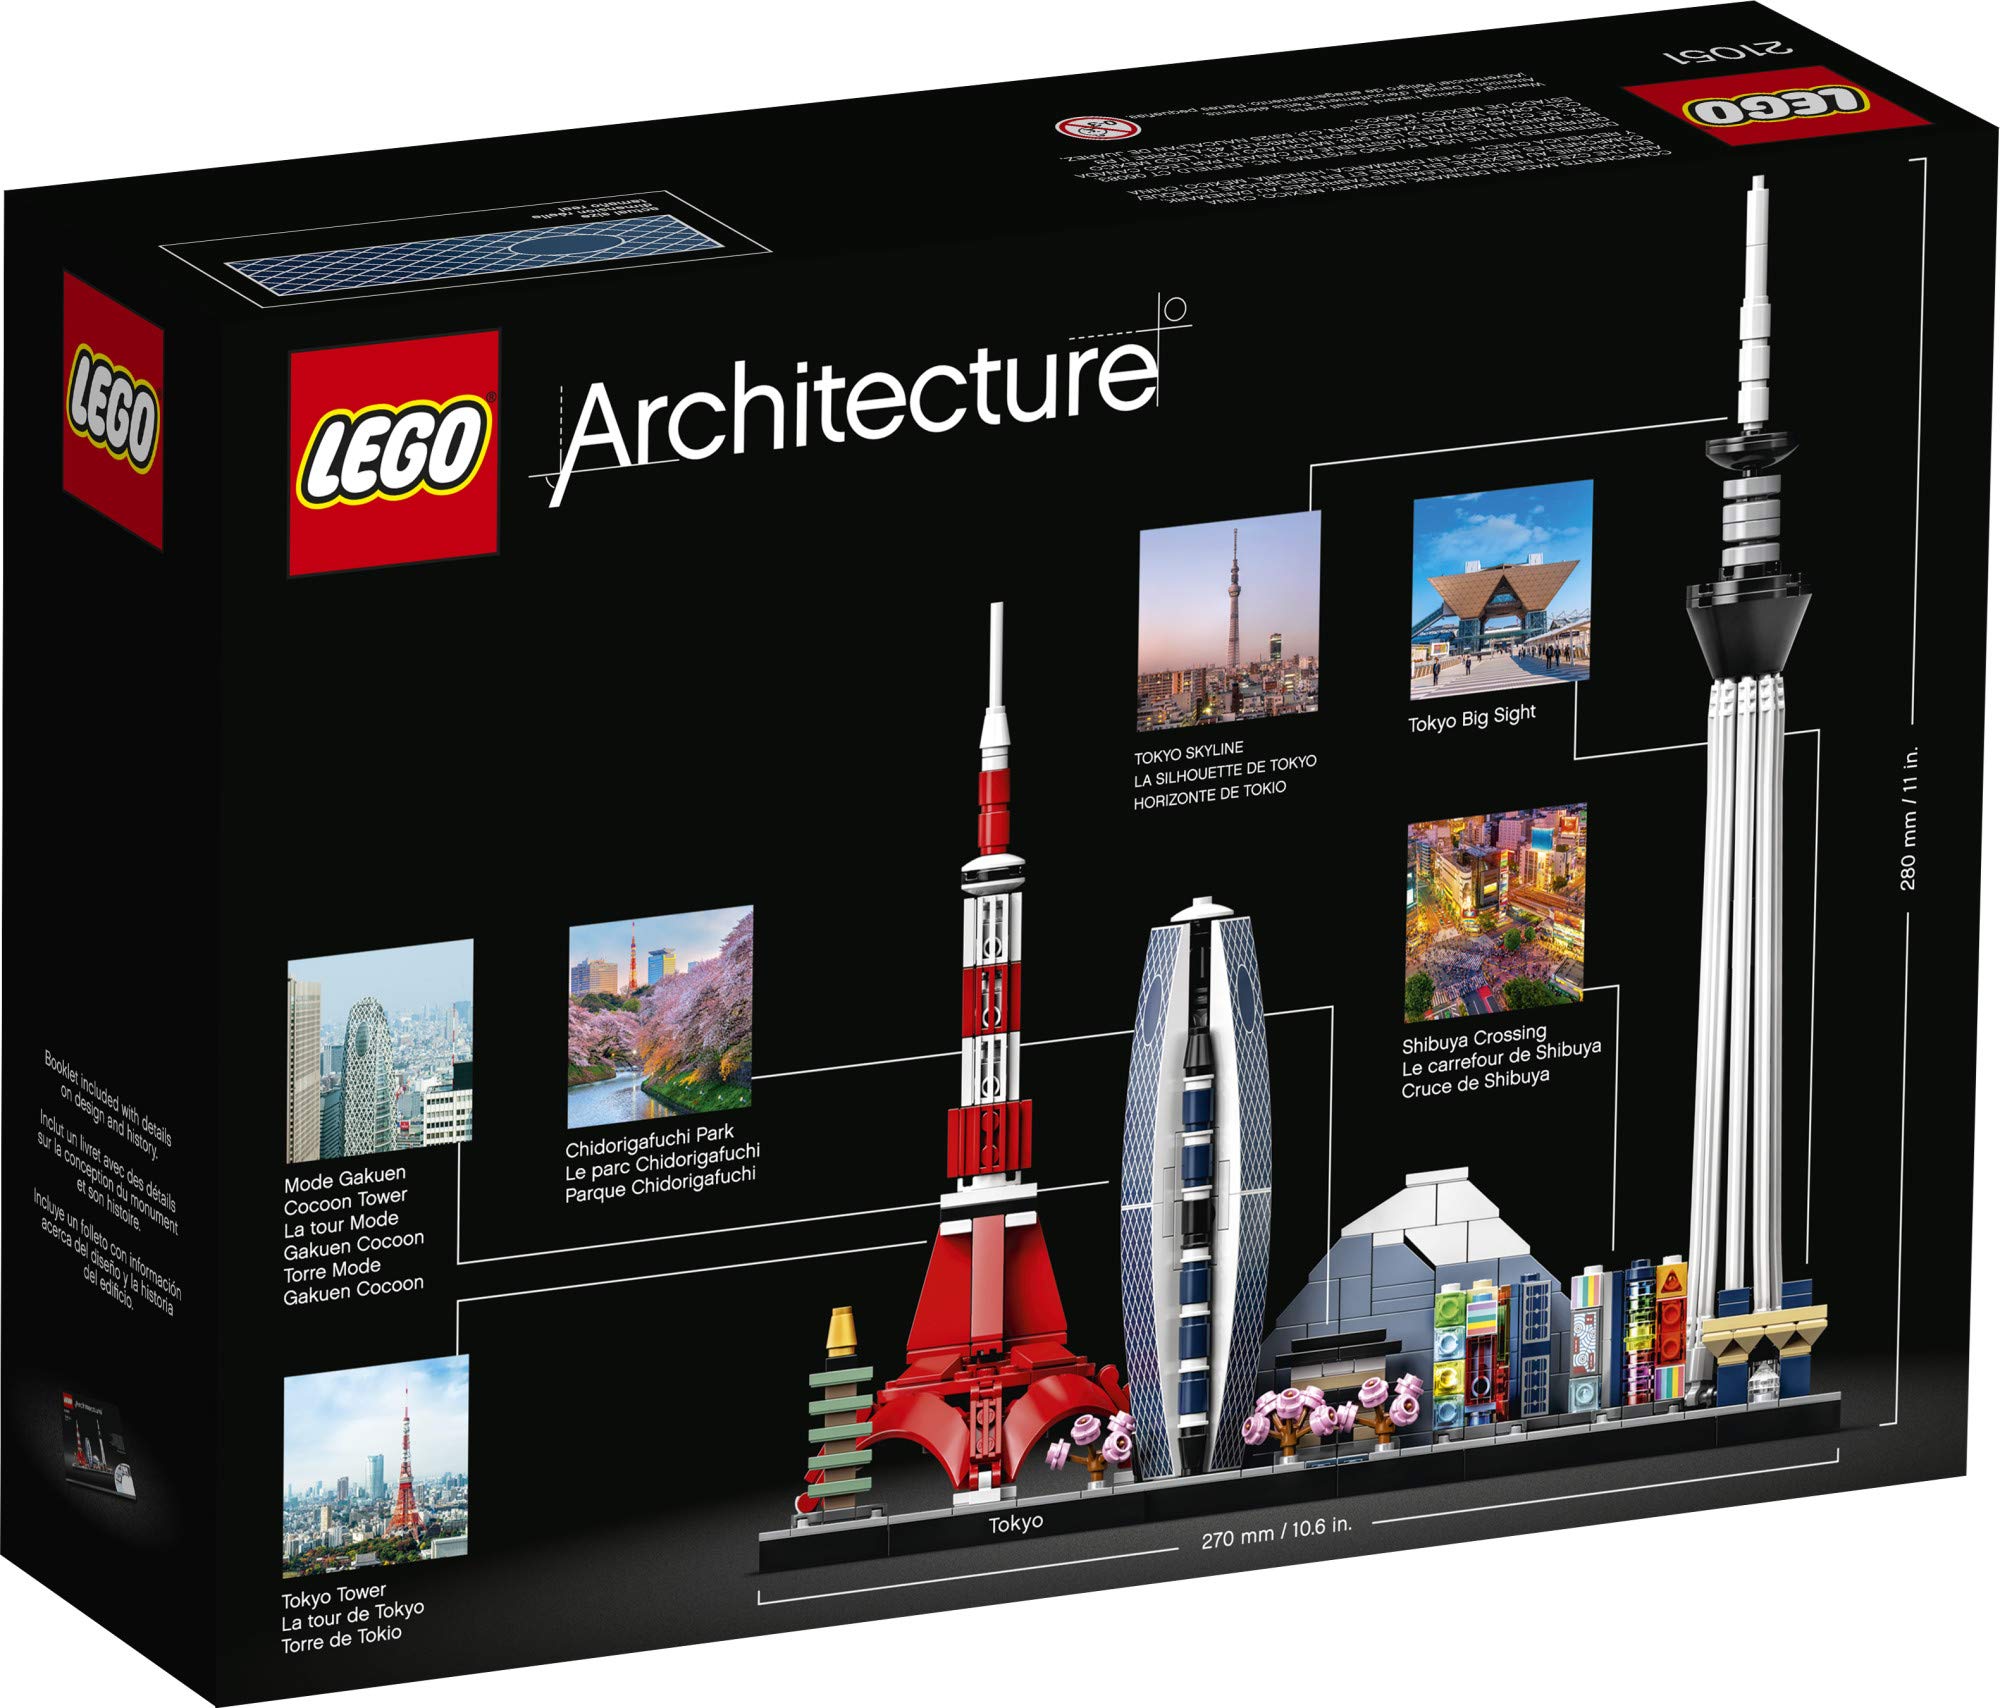 LEGO Architecture Skylines: Tokyo 21051 Building Kit, Collectible Architecture Building Set for Adults, New 2020 (547 Pieces) (Open Box, Like New)